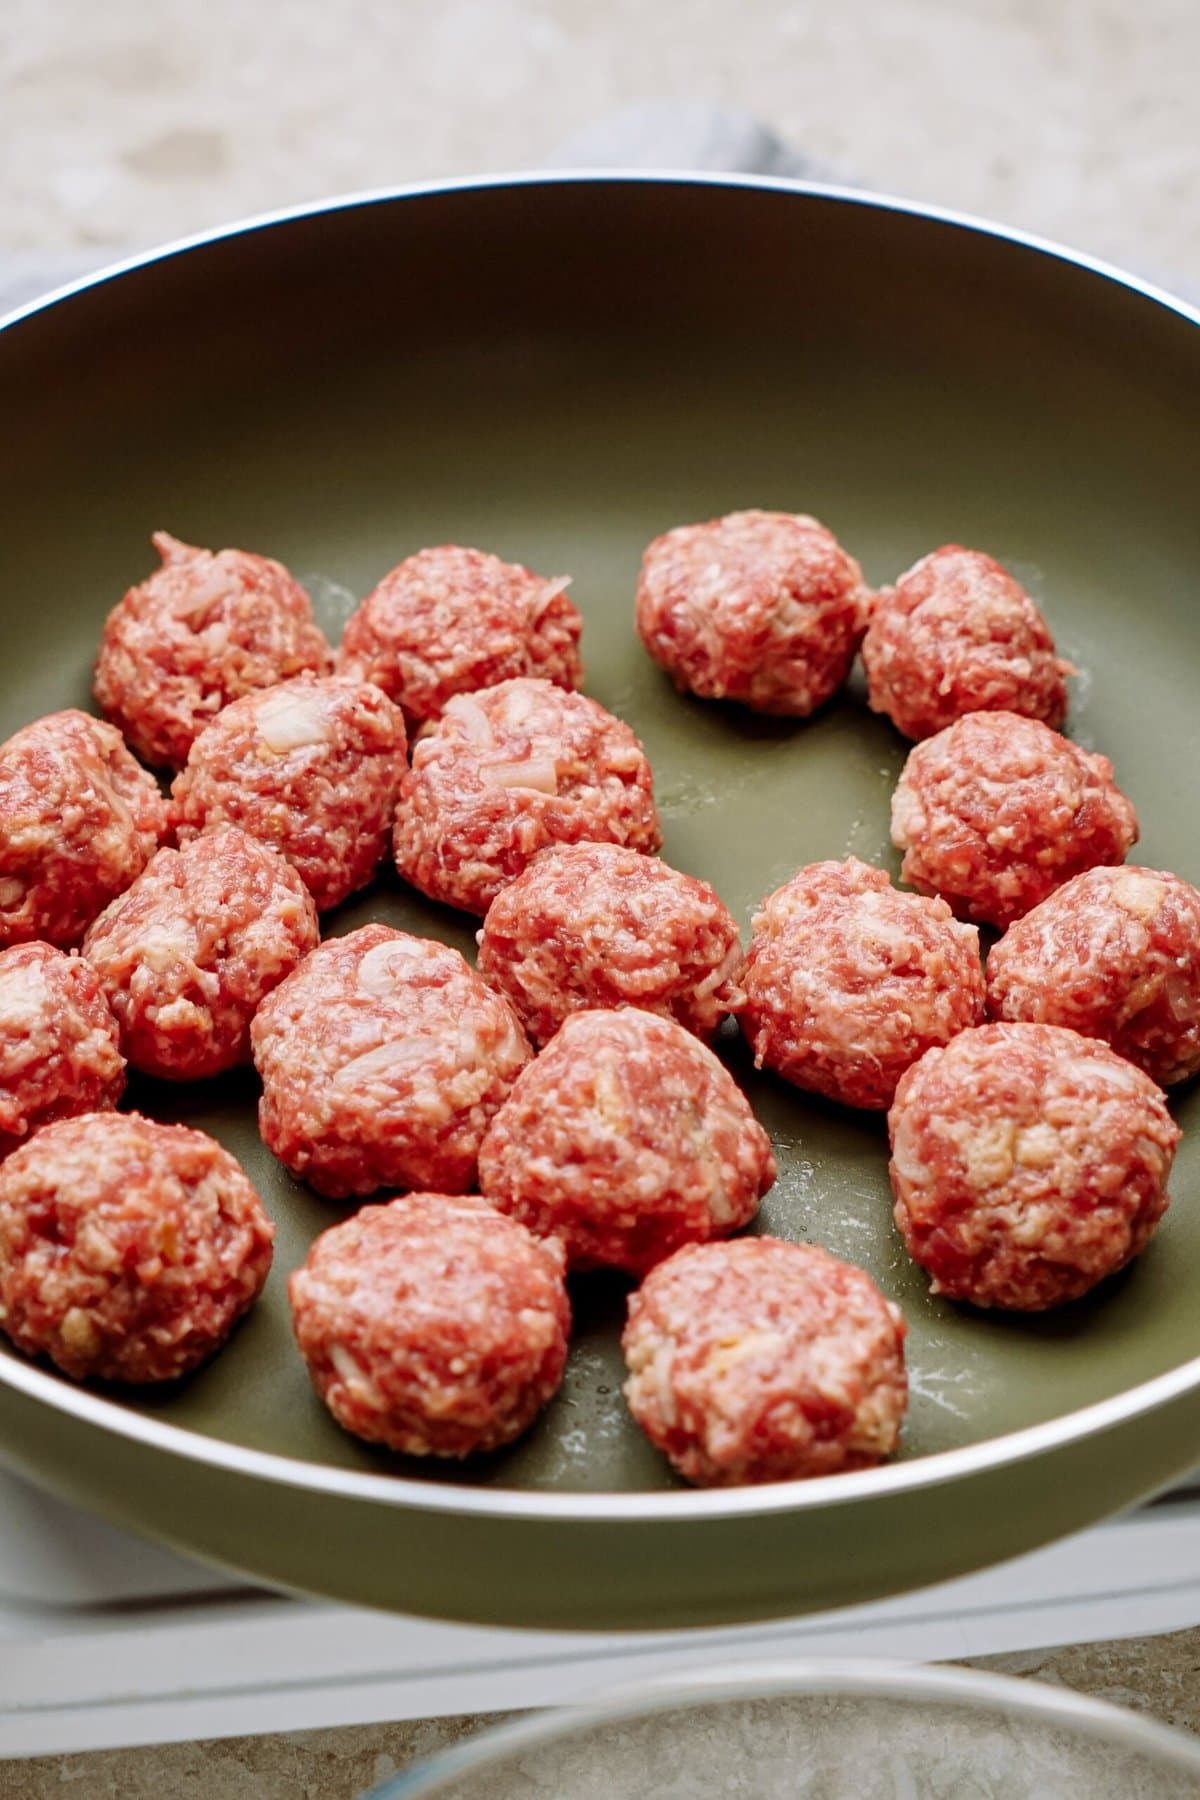 Raw meatballs arranged on a frying pan, ready to be cooked.